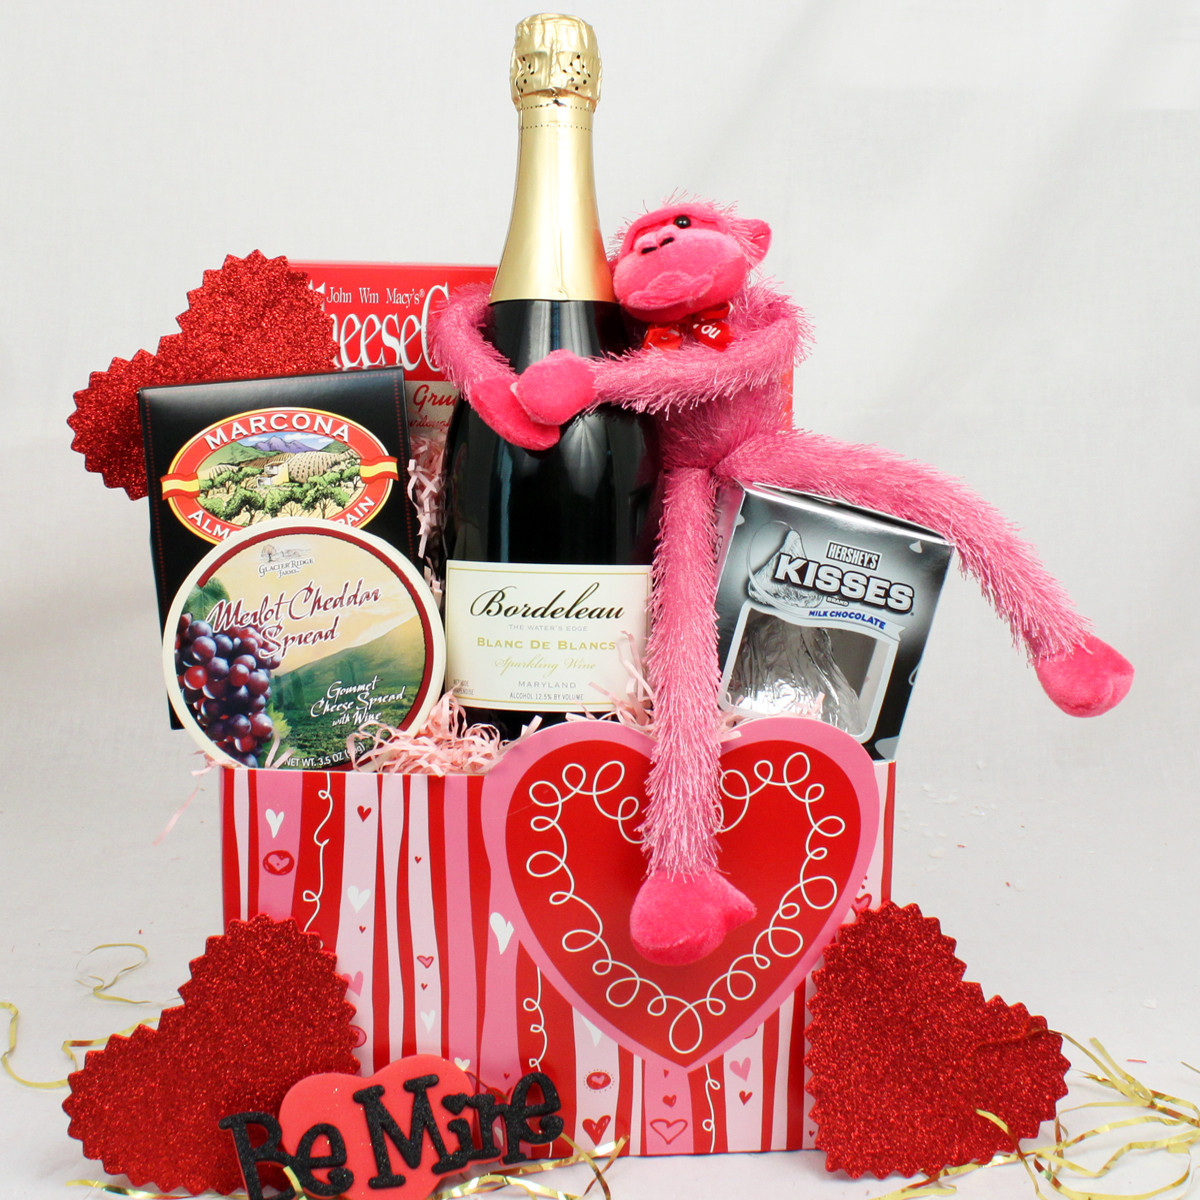 Creative Valentine Day Gift Ideas Elegant Creative and thoughtful Valentine’s Day Gifts for Her